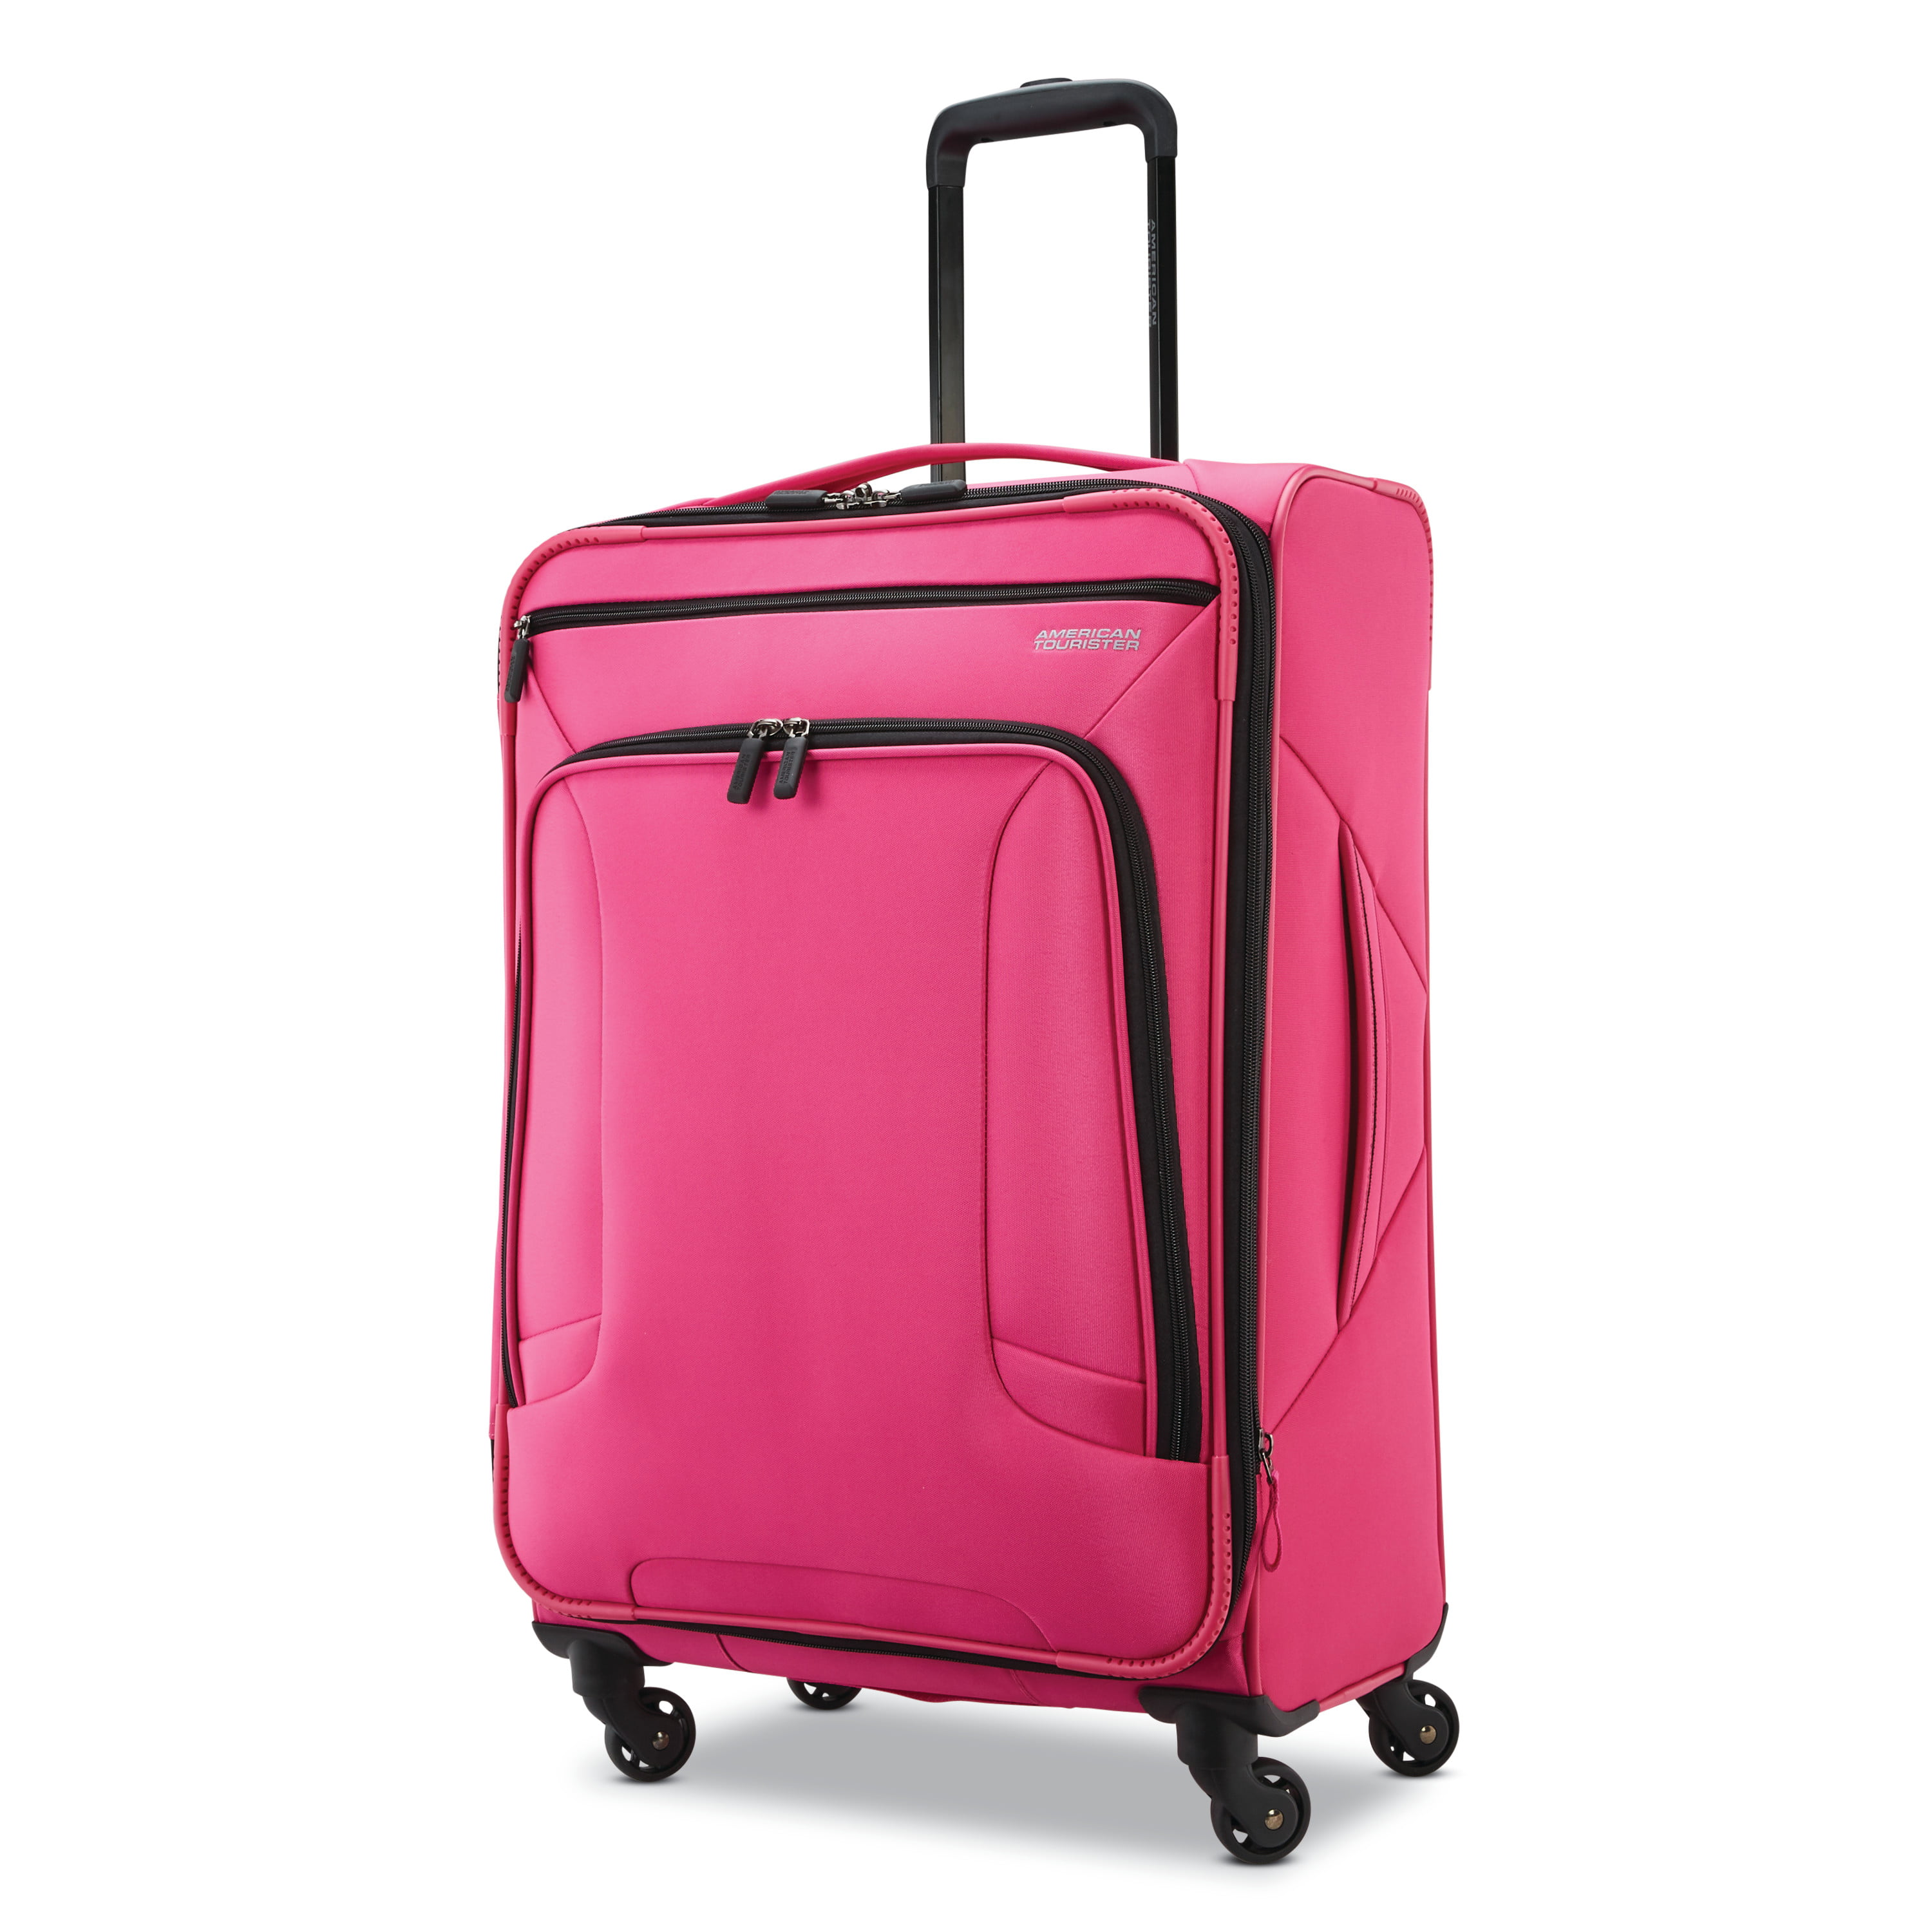 American Tourister 29" Softside Spinner Luggage -